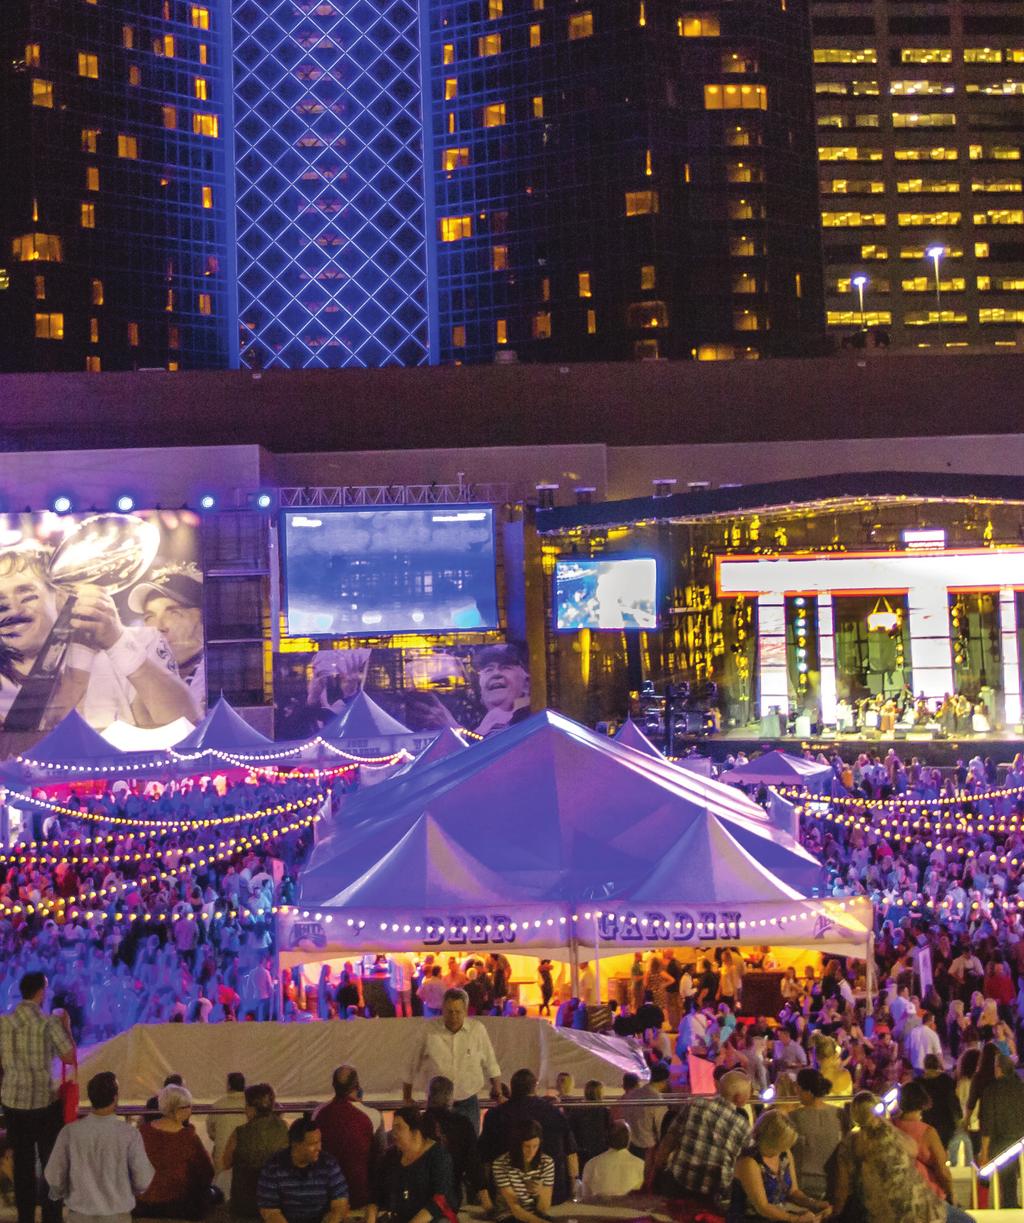 Due to curfew regulations, all music and entertainment in Champions Square must cease by 10:30 PM Sunday - Thursday and 11:00 PM Friday - Saturday.